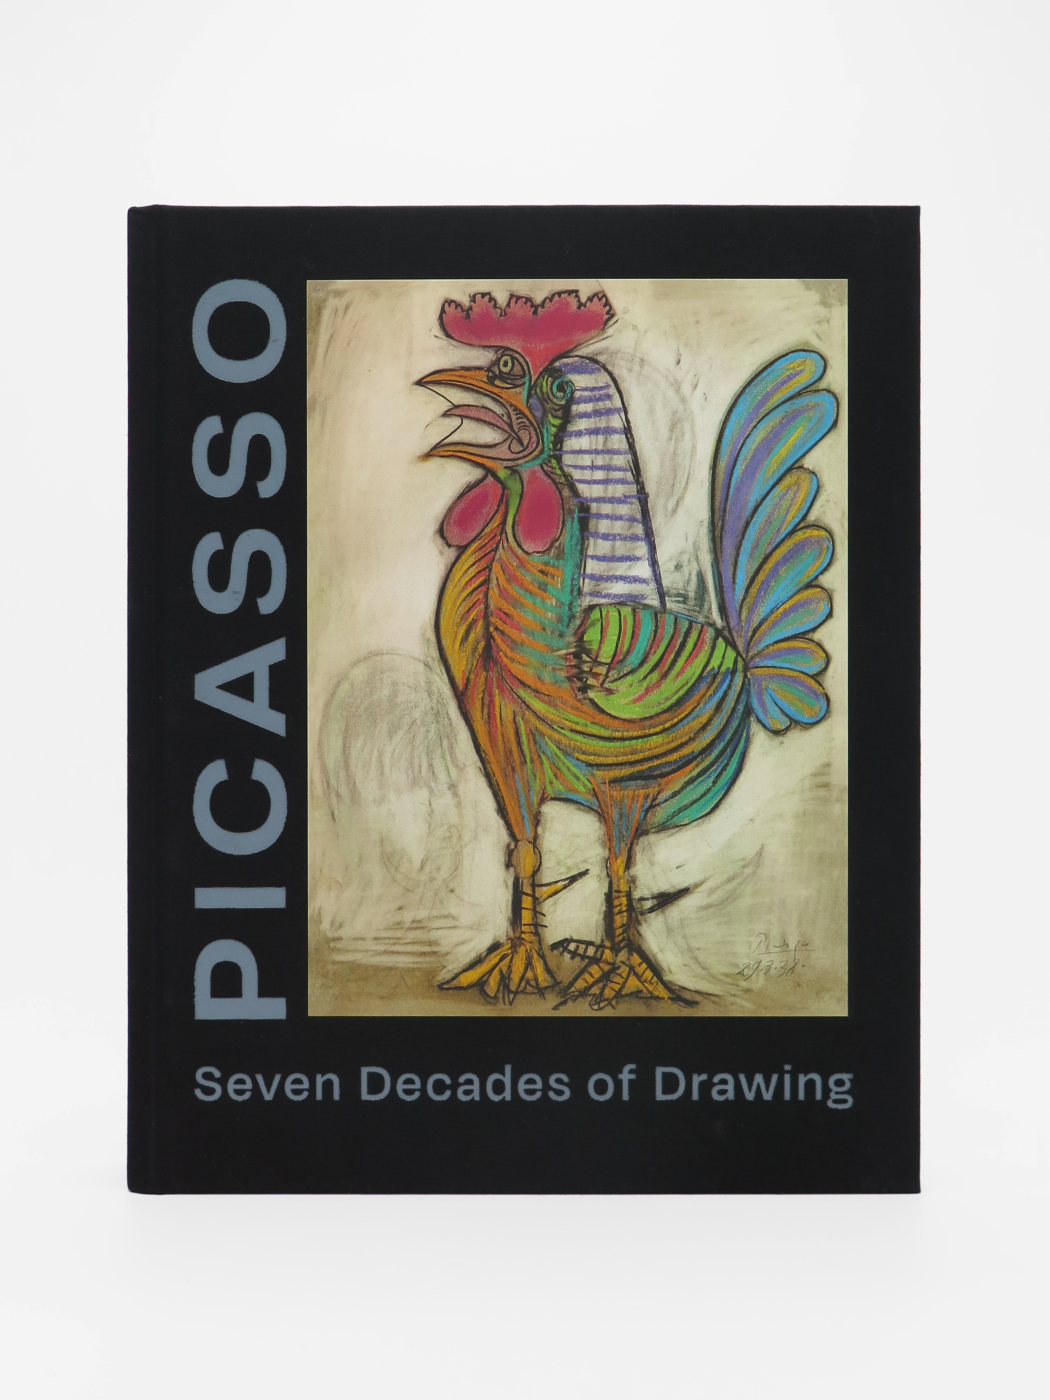 Pablo Picasso, Seven Decades of Drawing